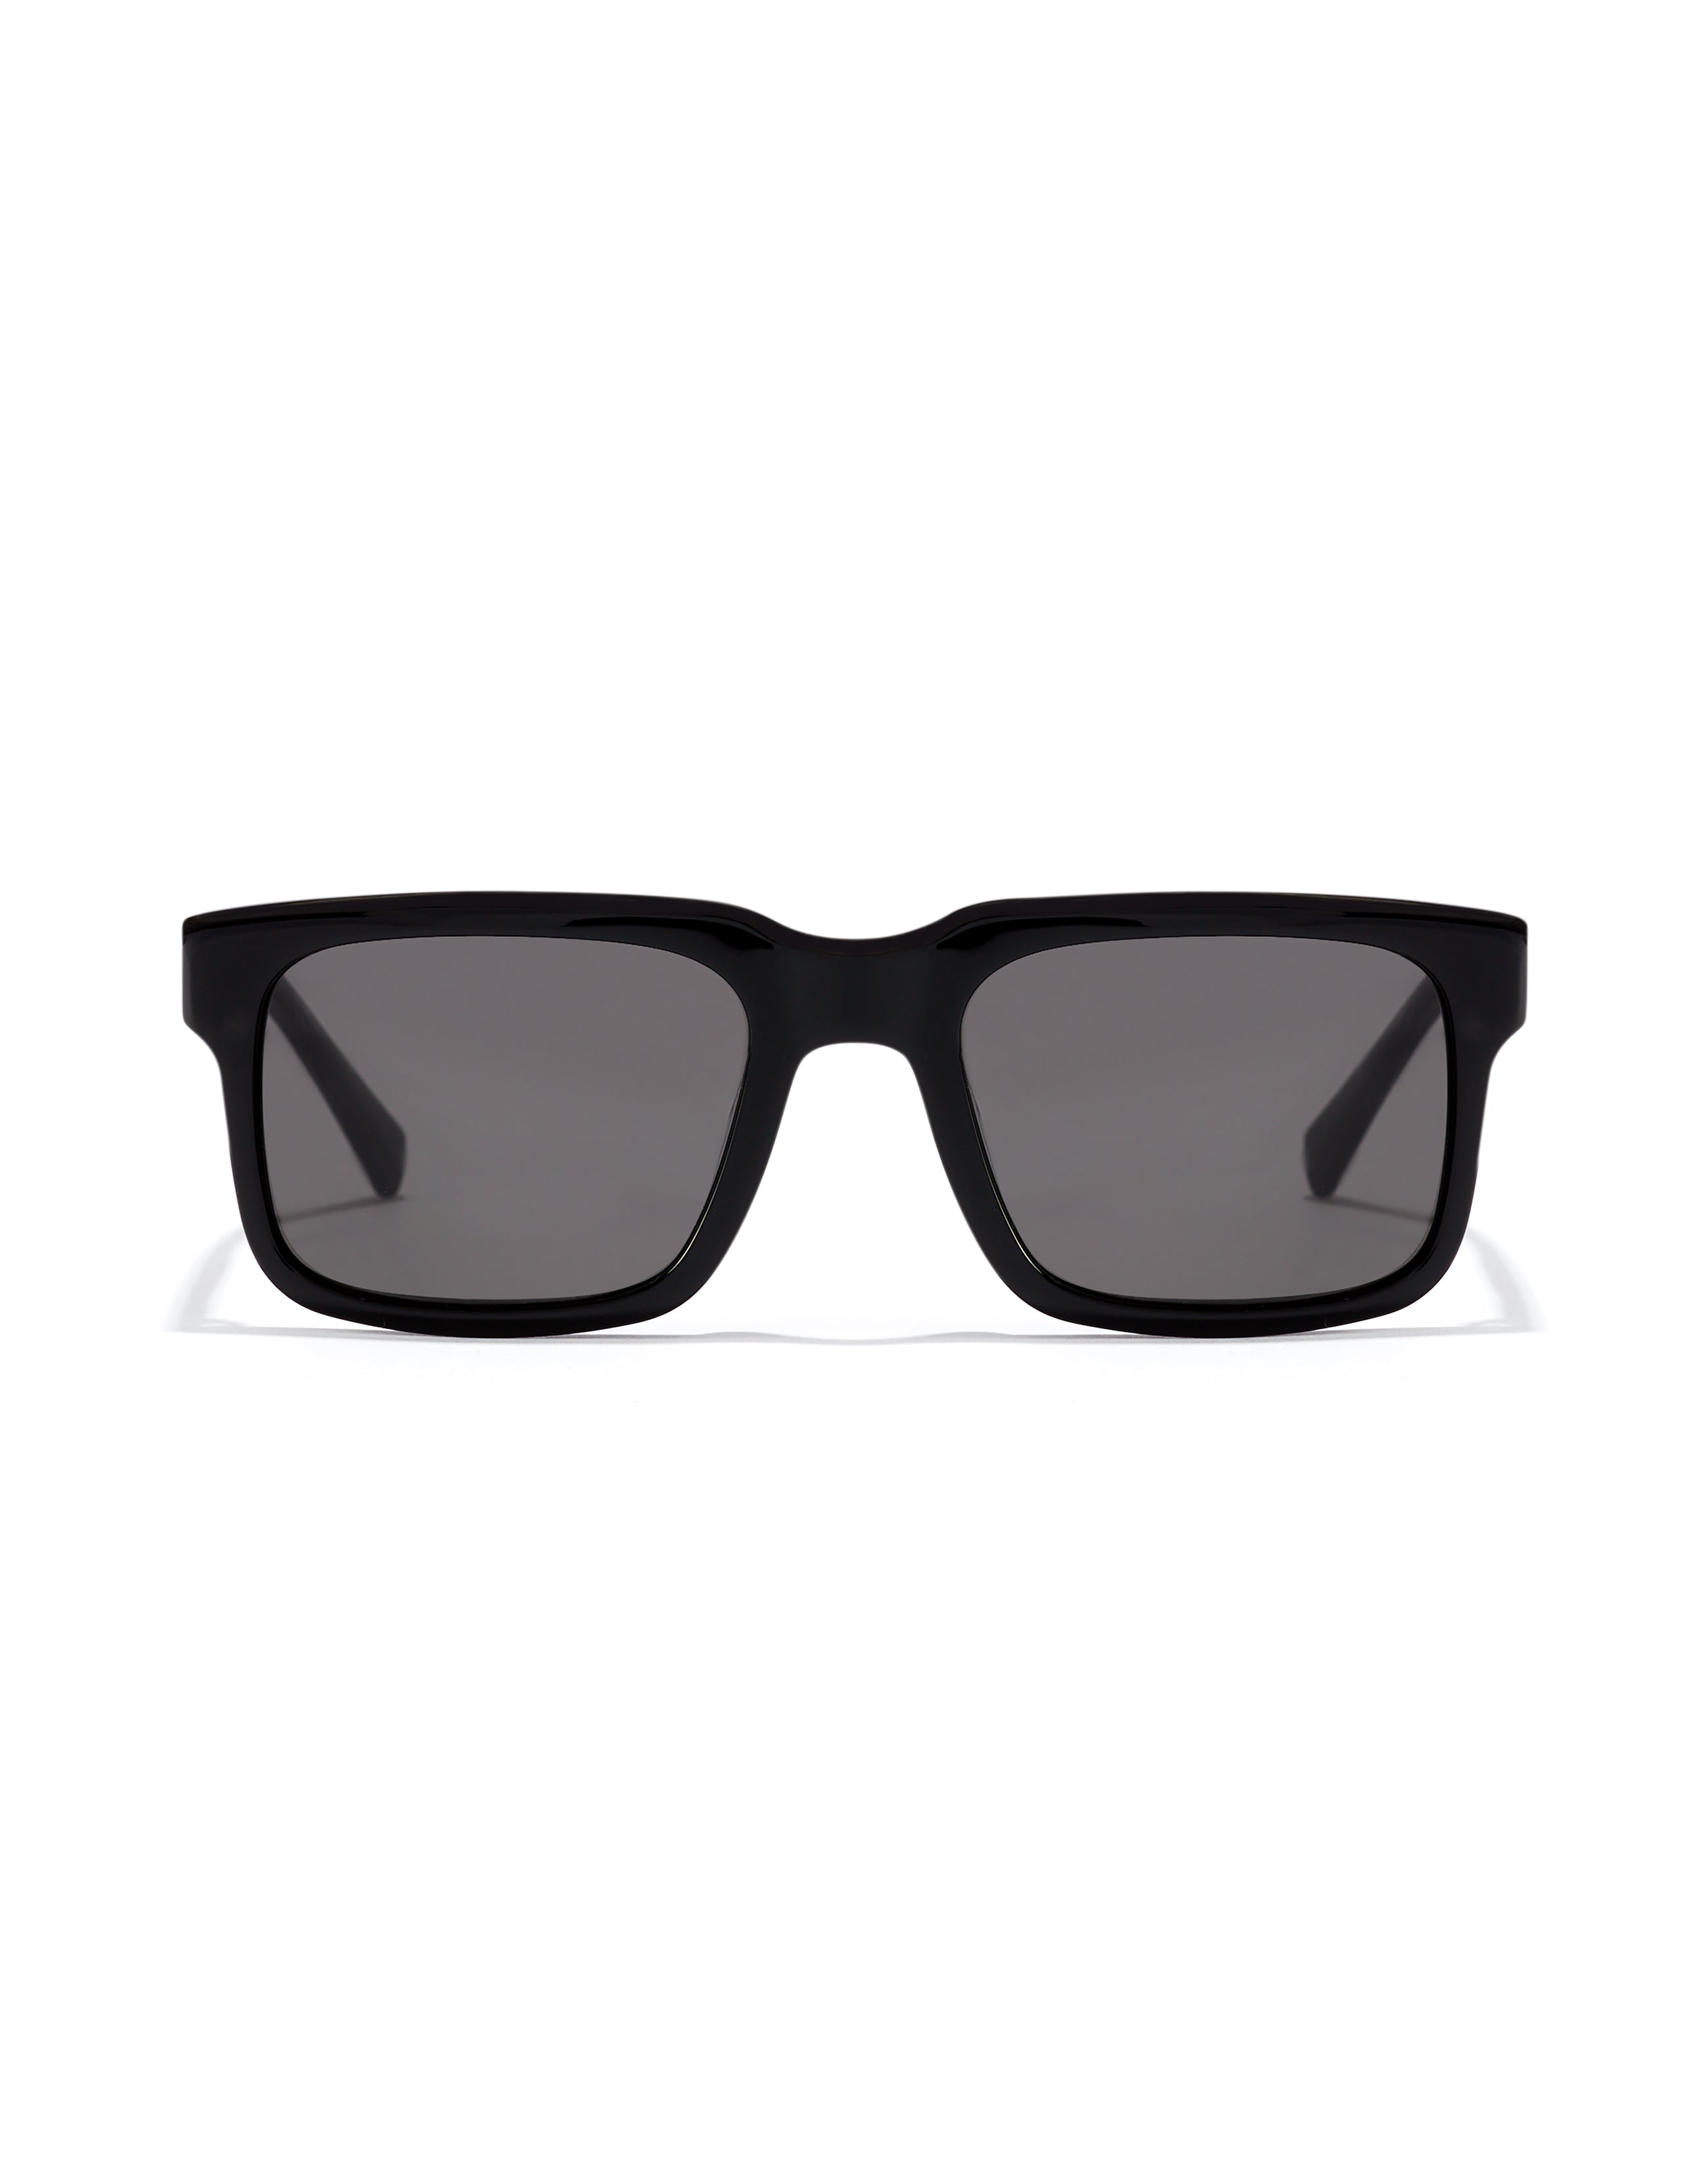 HAWKERS - INWOOD Black For Men and Women UV400